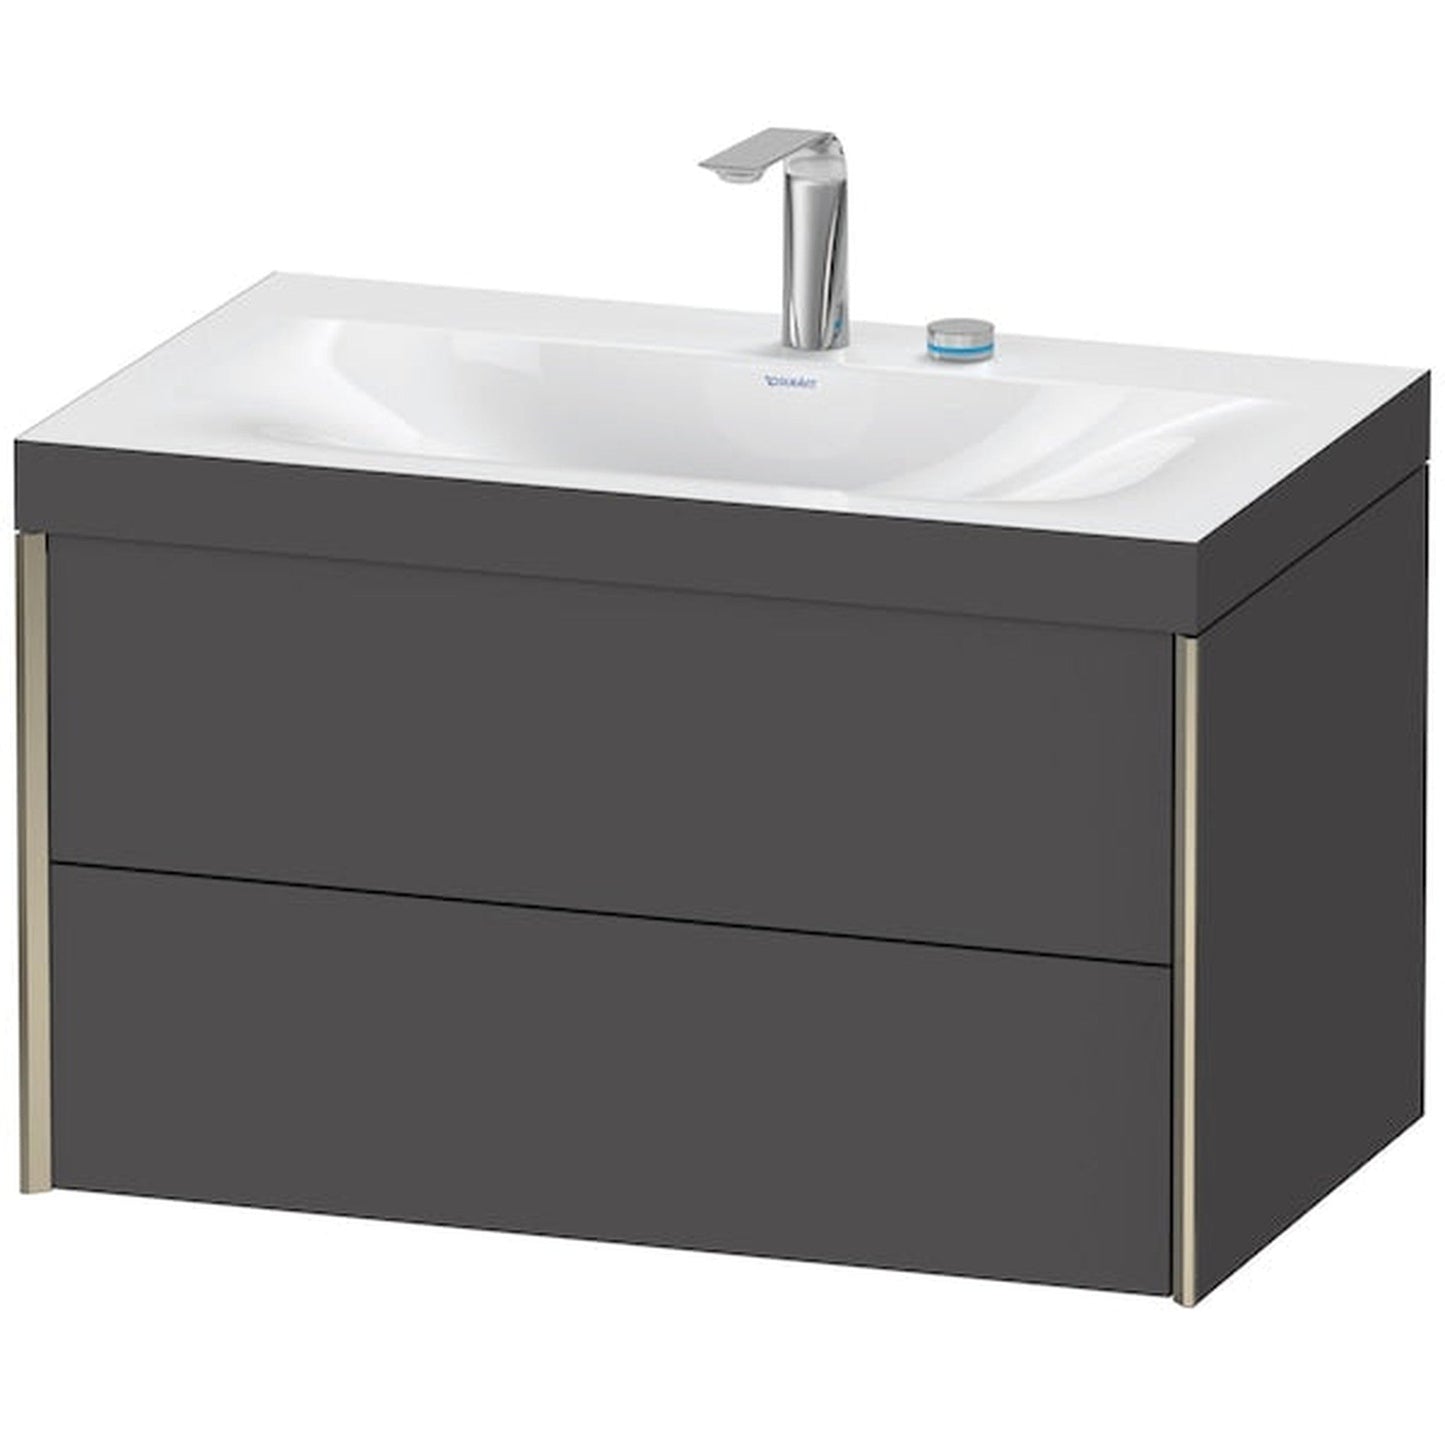 Duravit Xviu 31" x 20" x 19" Two Drawer C-Bonded Wall-Mount Vanity Kit With Two Tap Holes, Graphite (XV4615EB149C)